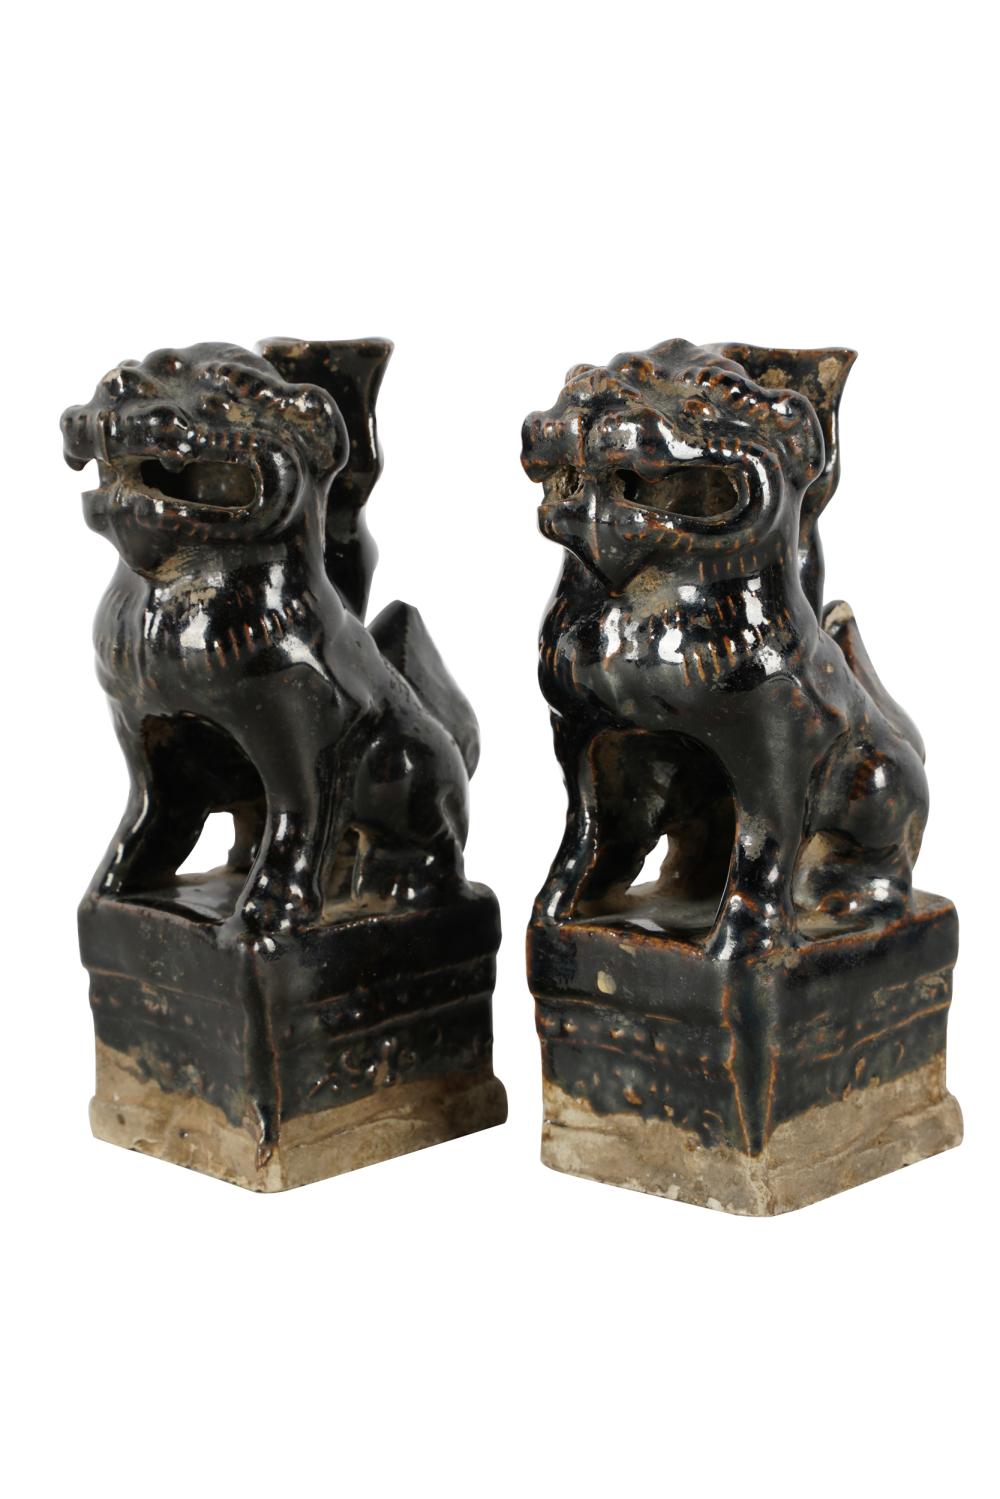 PAIR OF CHINESE BROWN-GLAZED FOO DOGSunsigned;